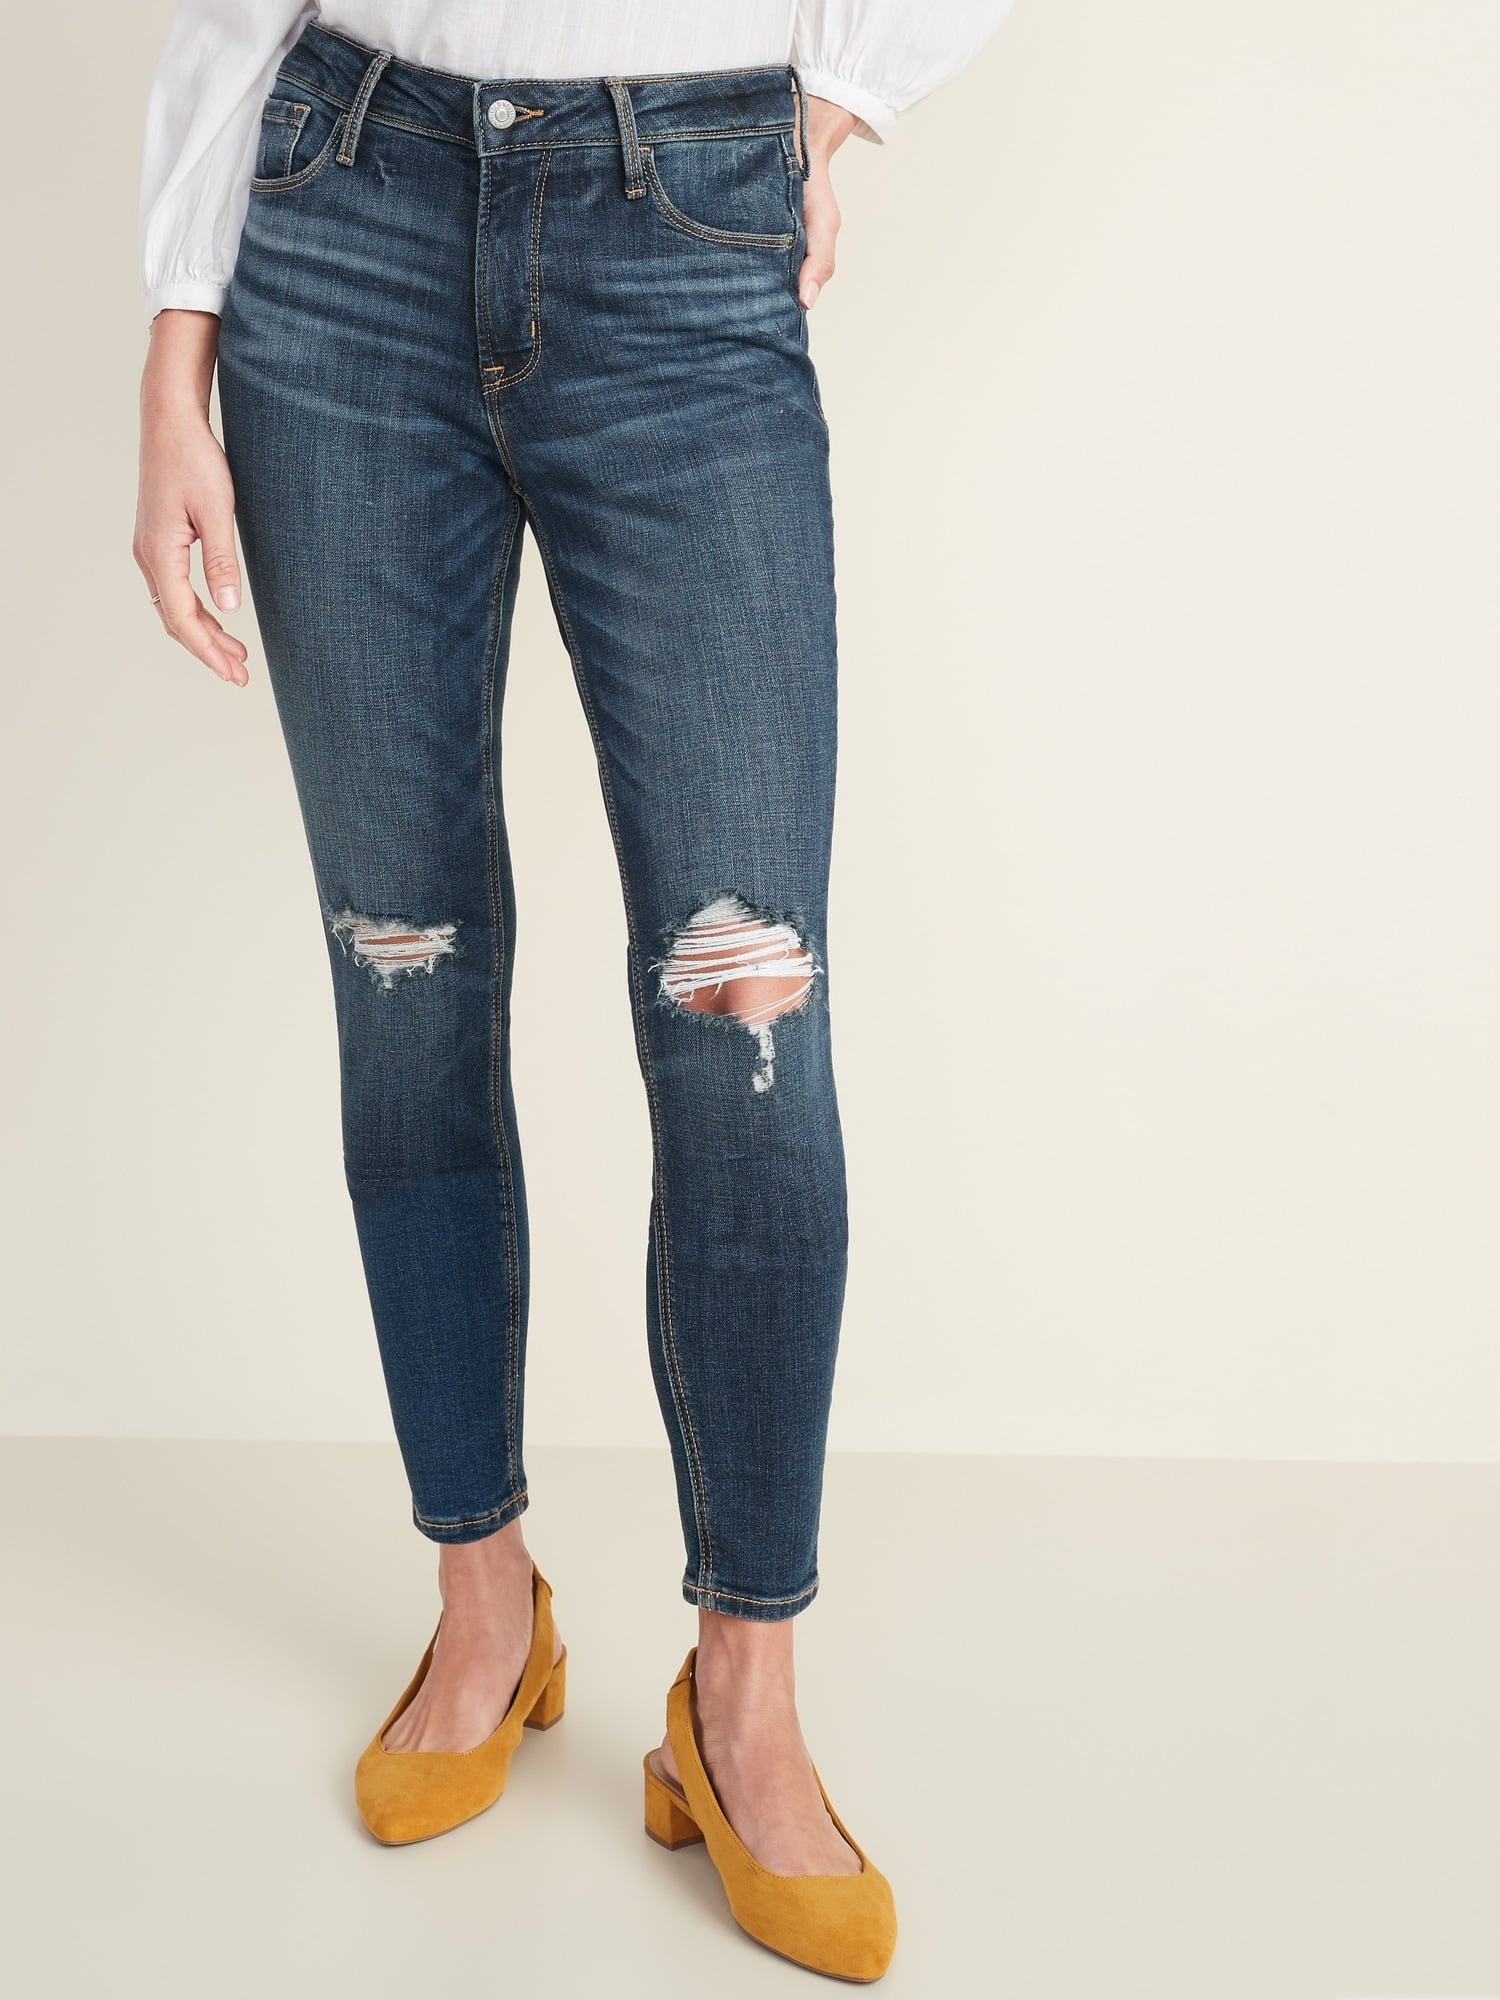 old navy women's high rise jeans